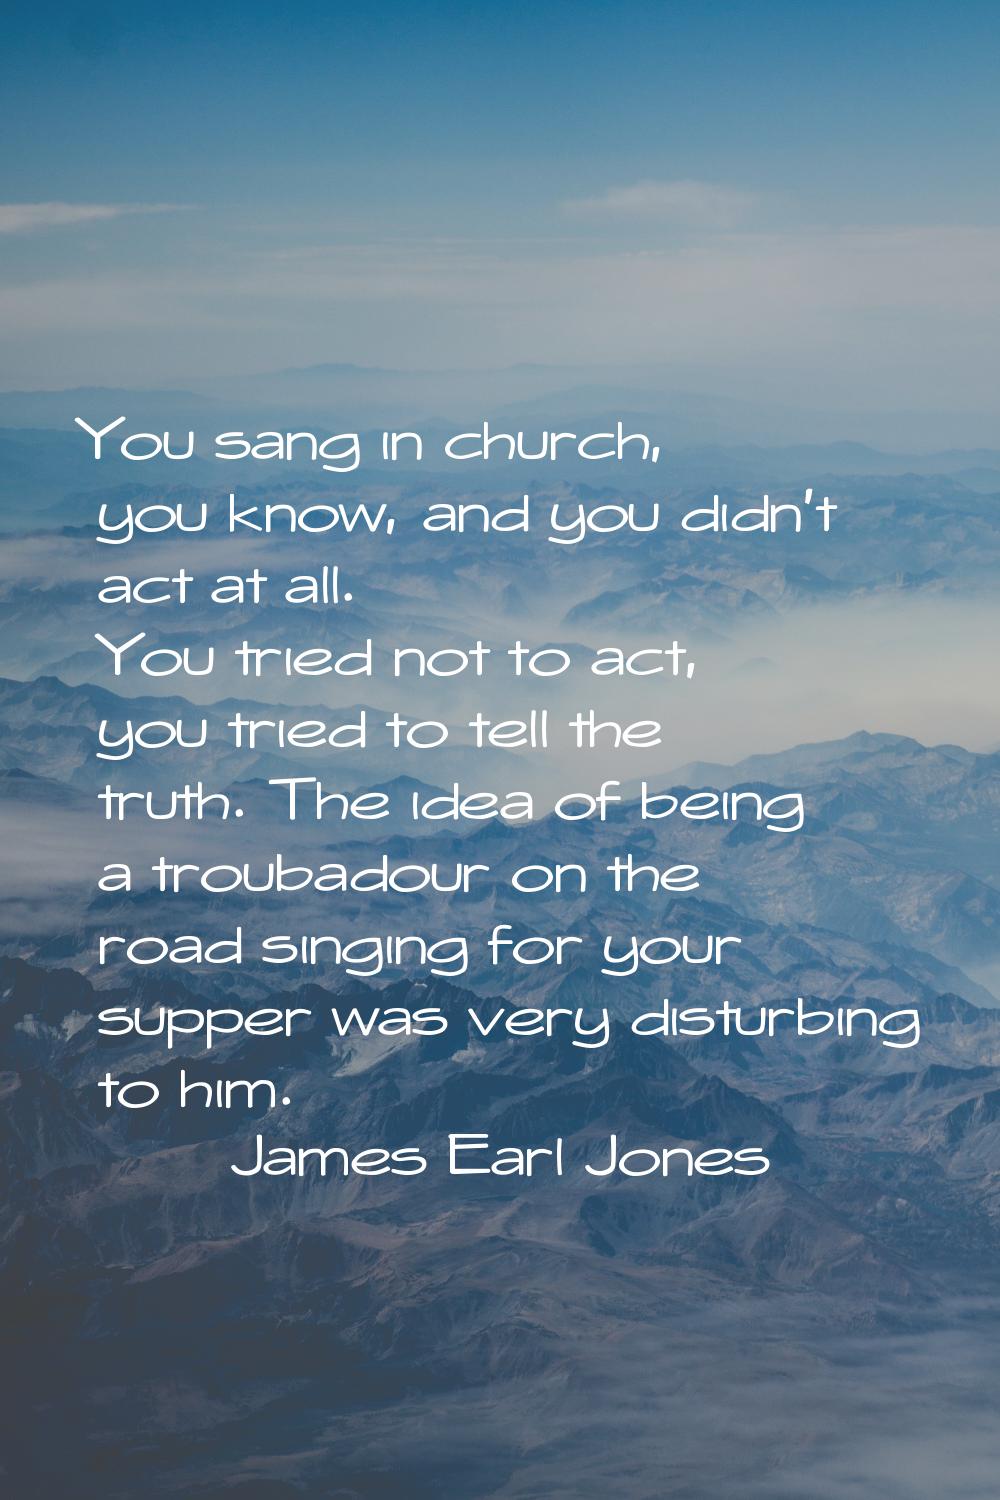 You sang in church, you know, and you didn't act at all. You tried not to act, you tried to tell th